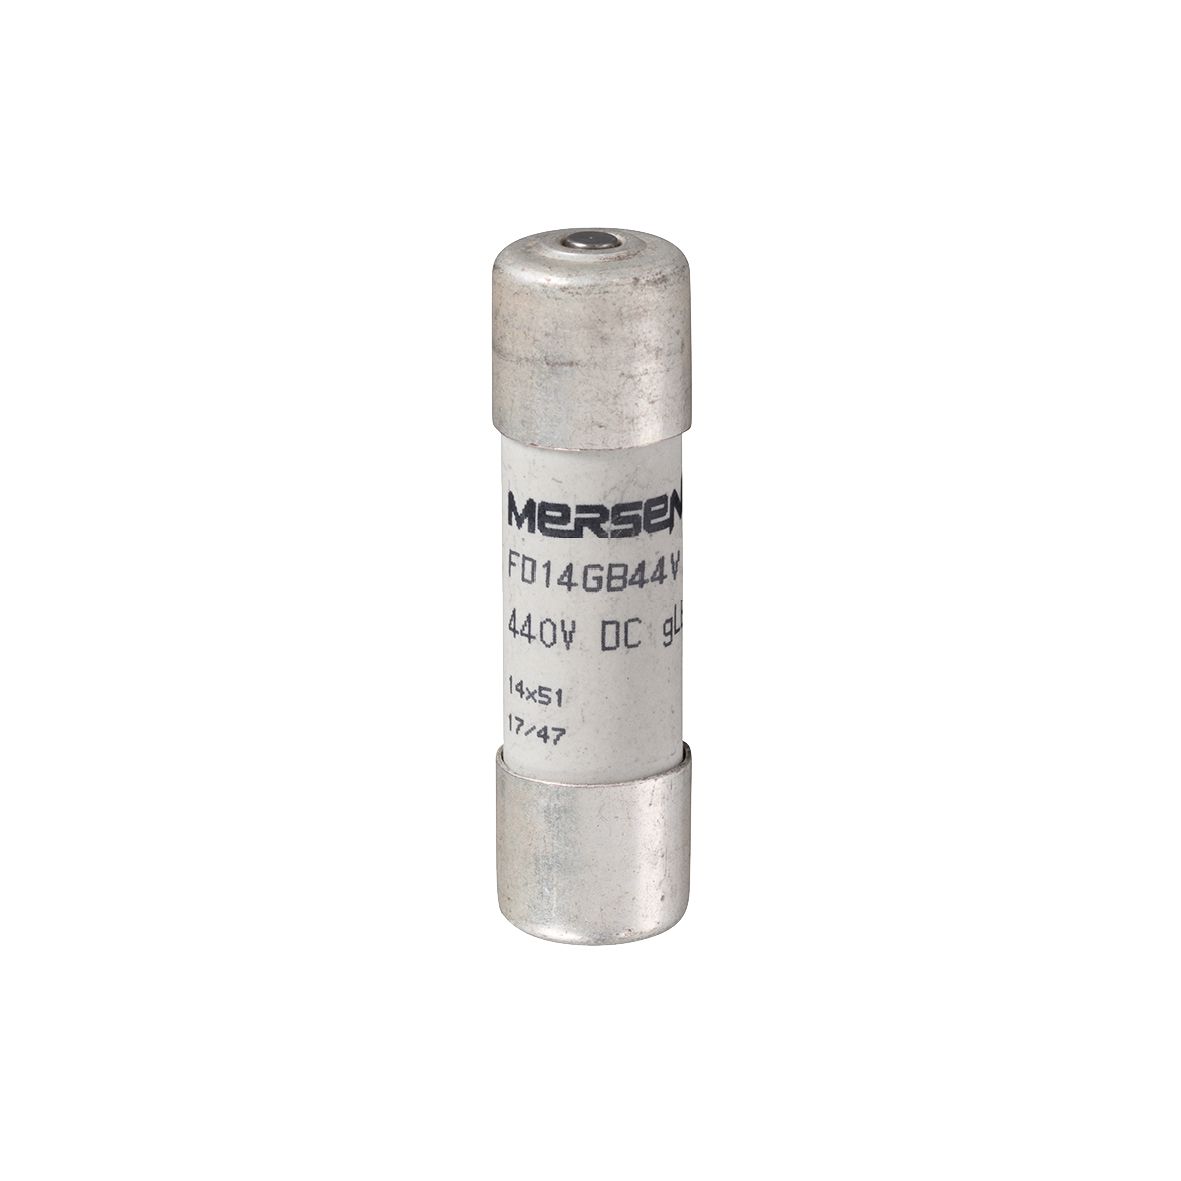 R094085 - Cylindrical fuse-link GRB 440VDC 14x51, 12A with striker